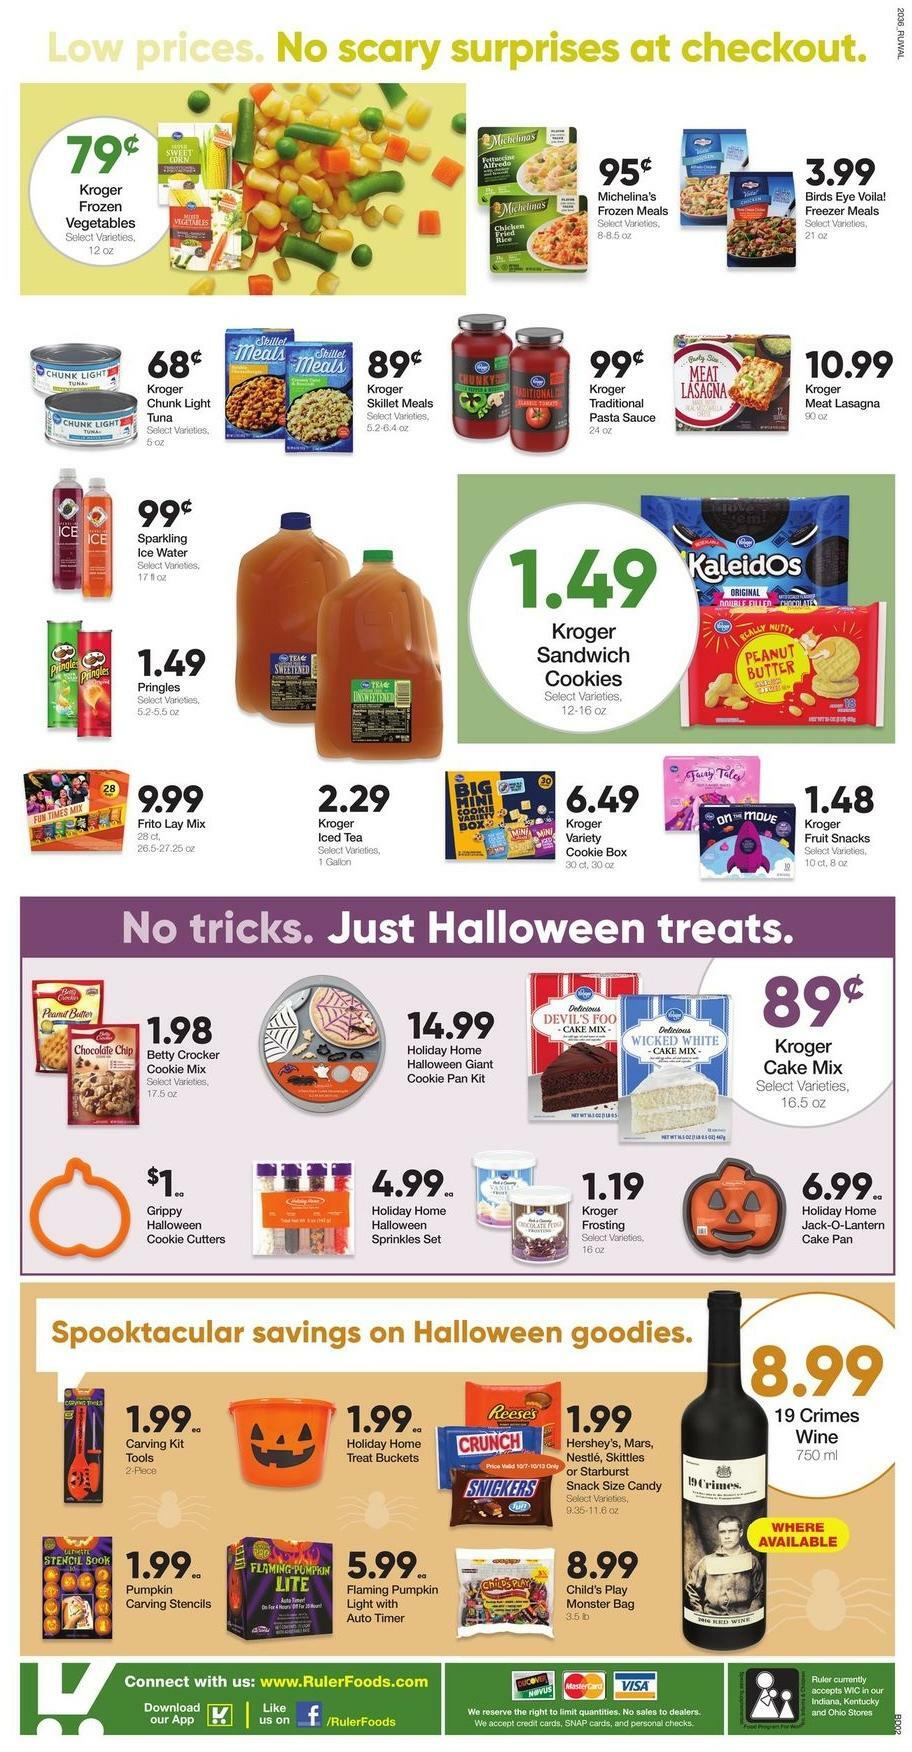 Ruler Foods Best Offers And Special Buys For October 7 Page 2